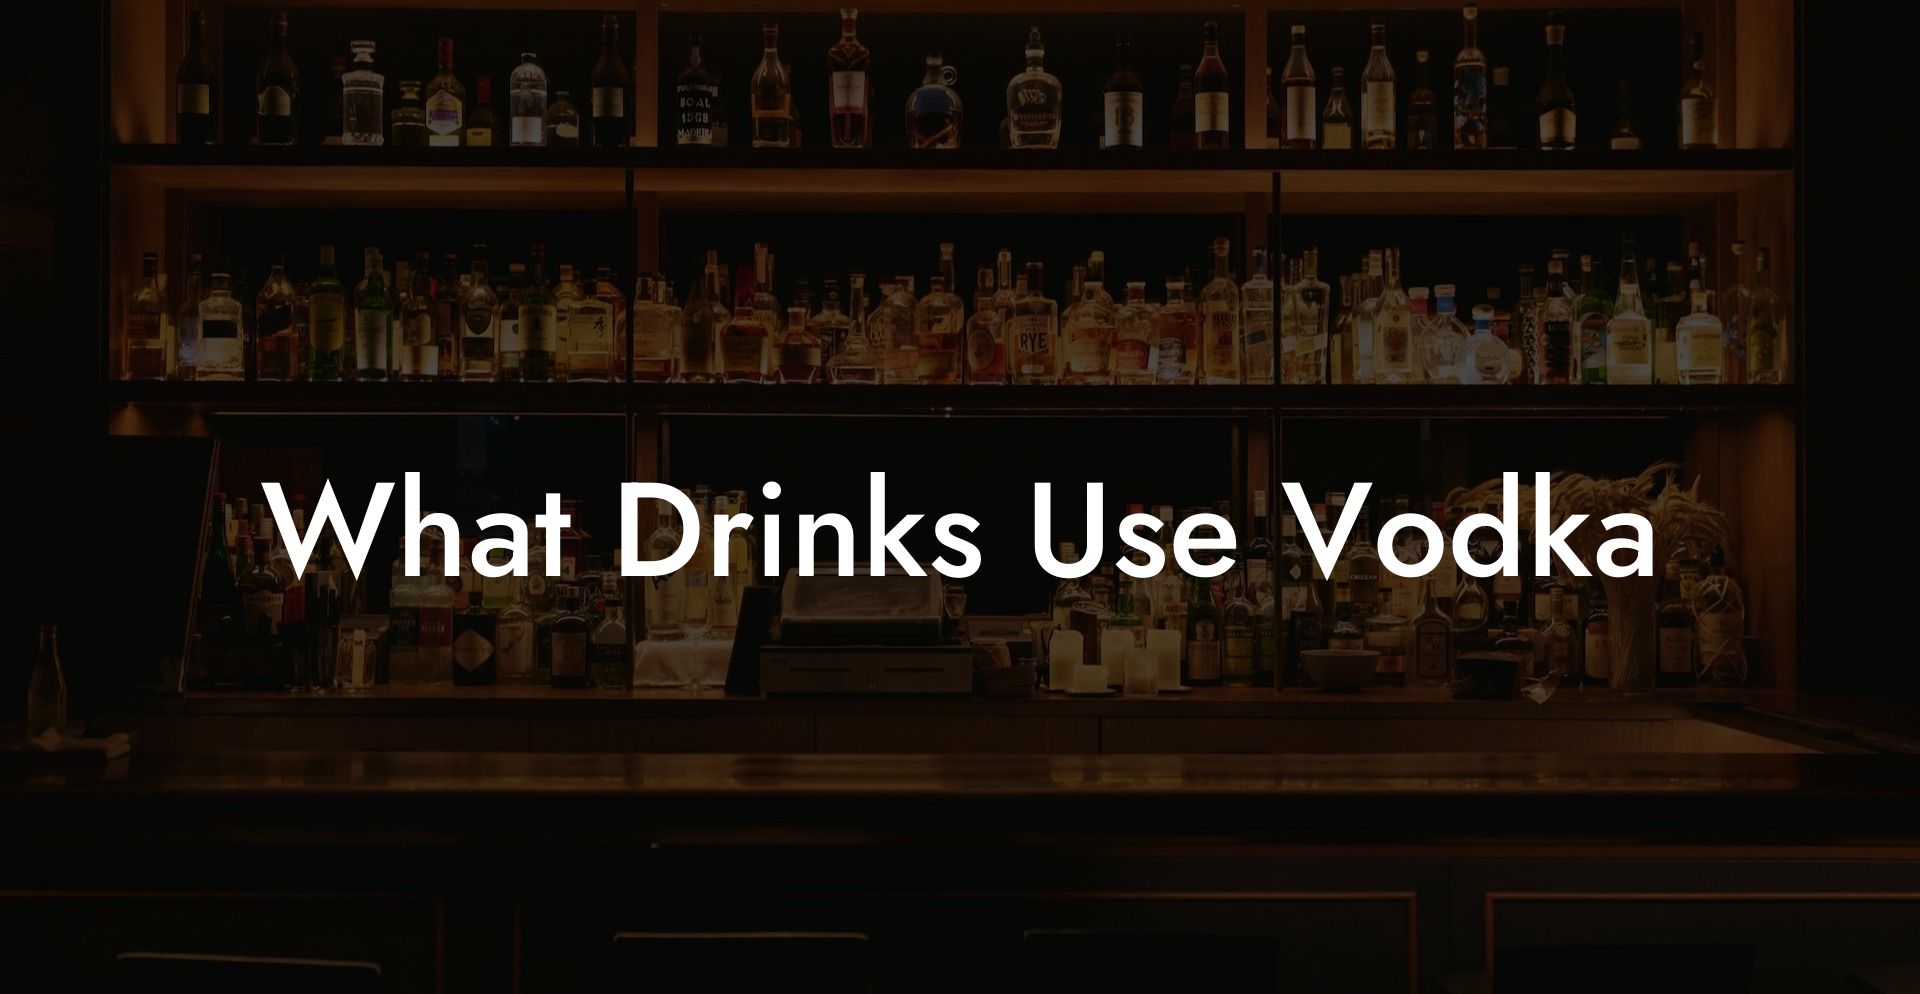 What Drinks Use Vodka